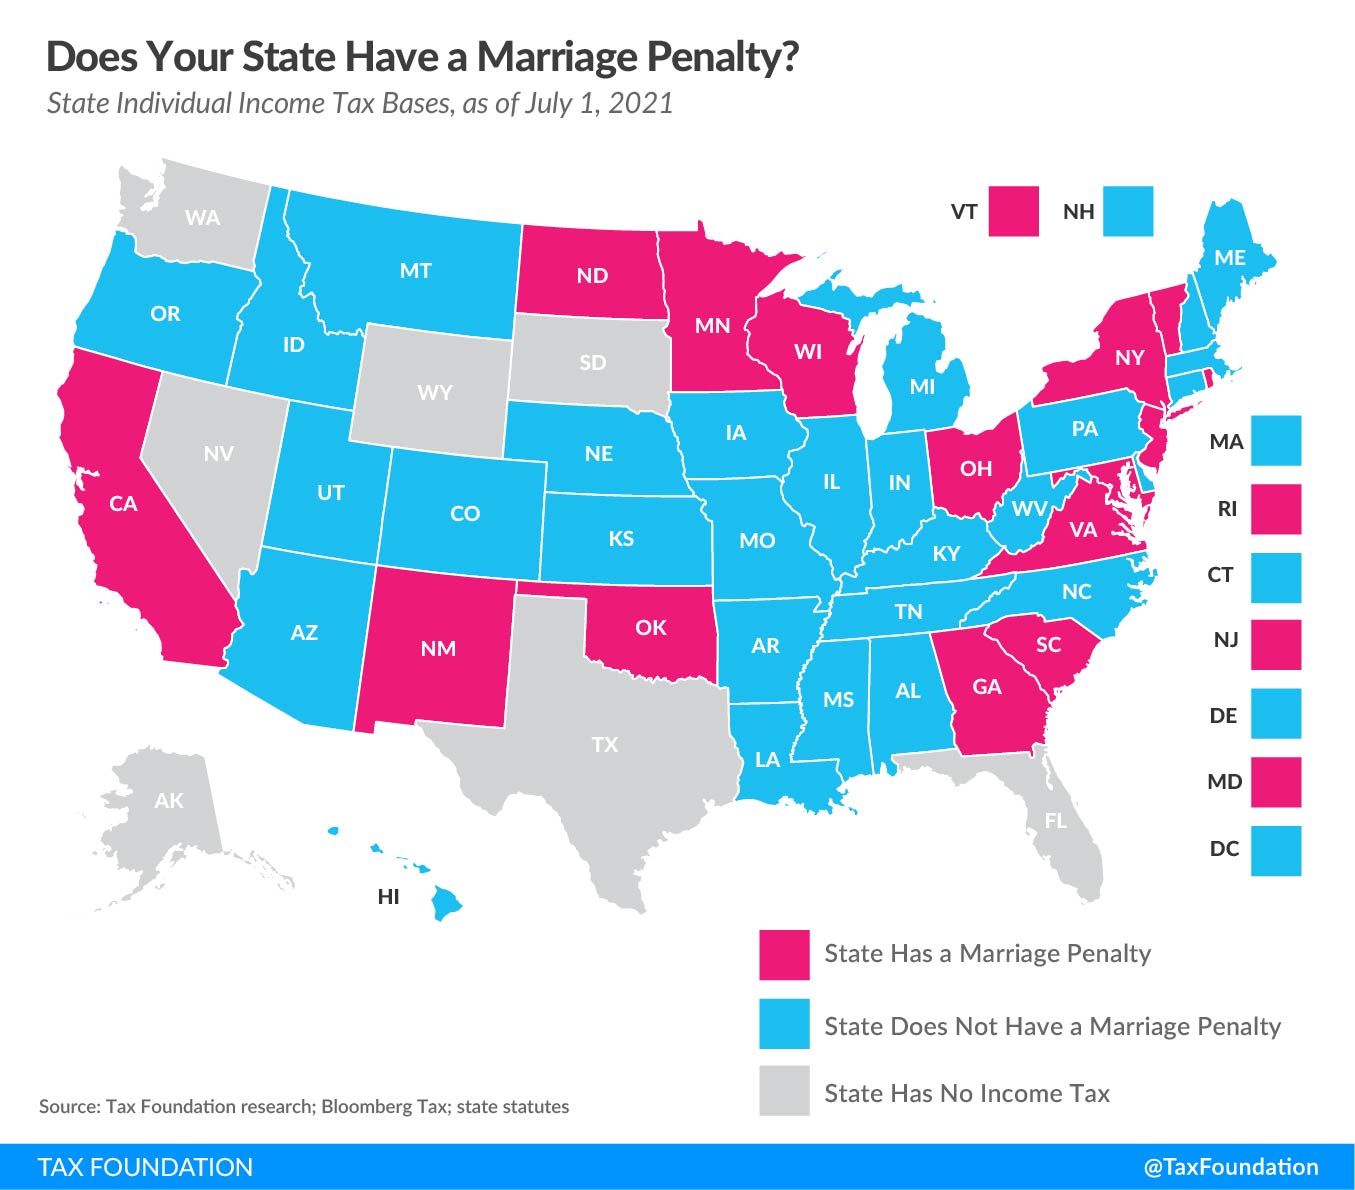 State marriage penalty, state marriage penalties, does your state have a marriage penalty 2021